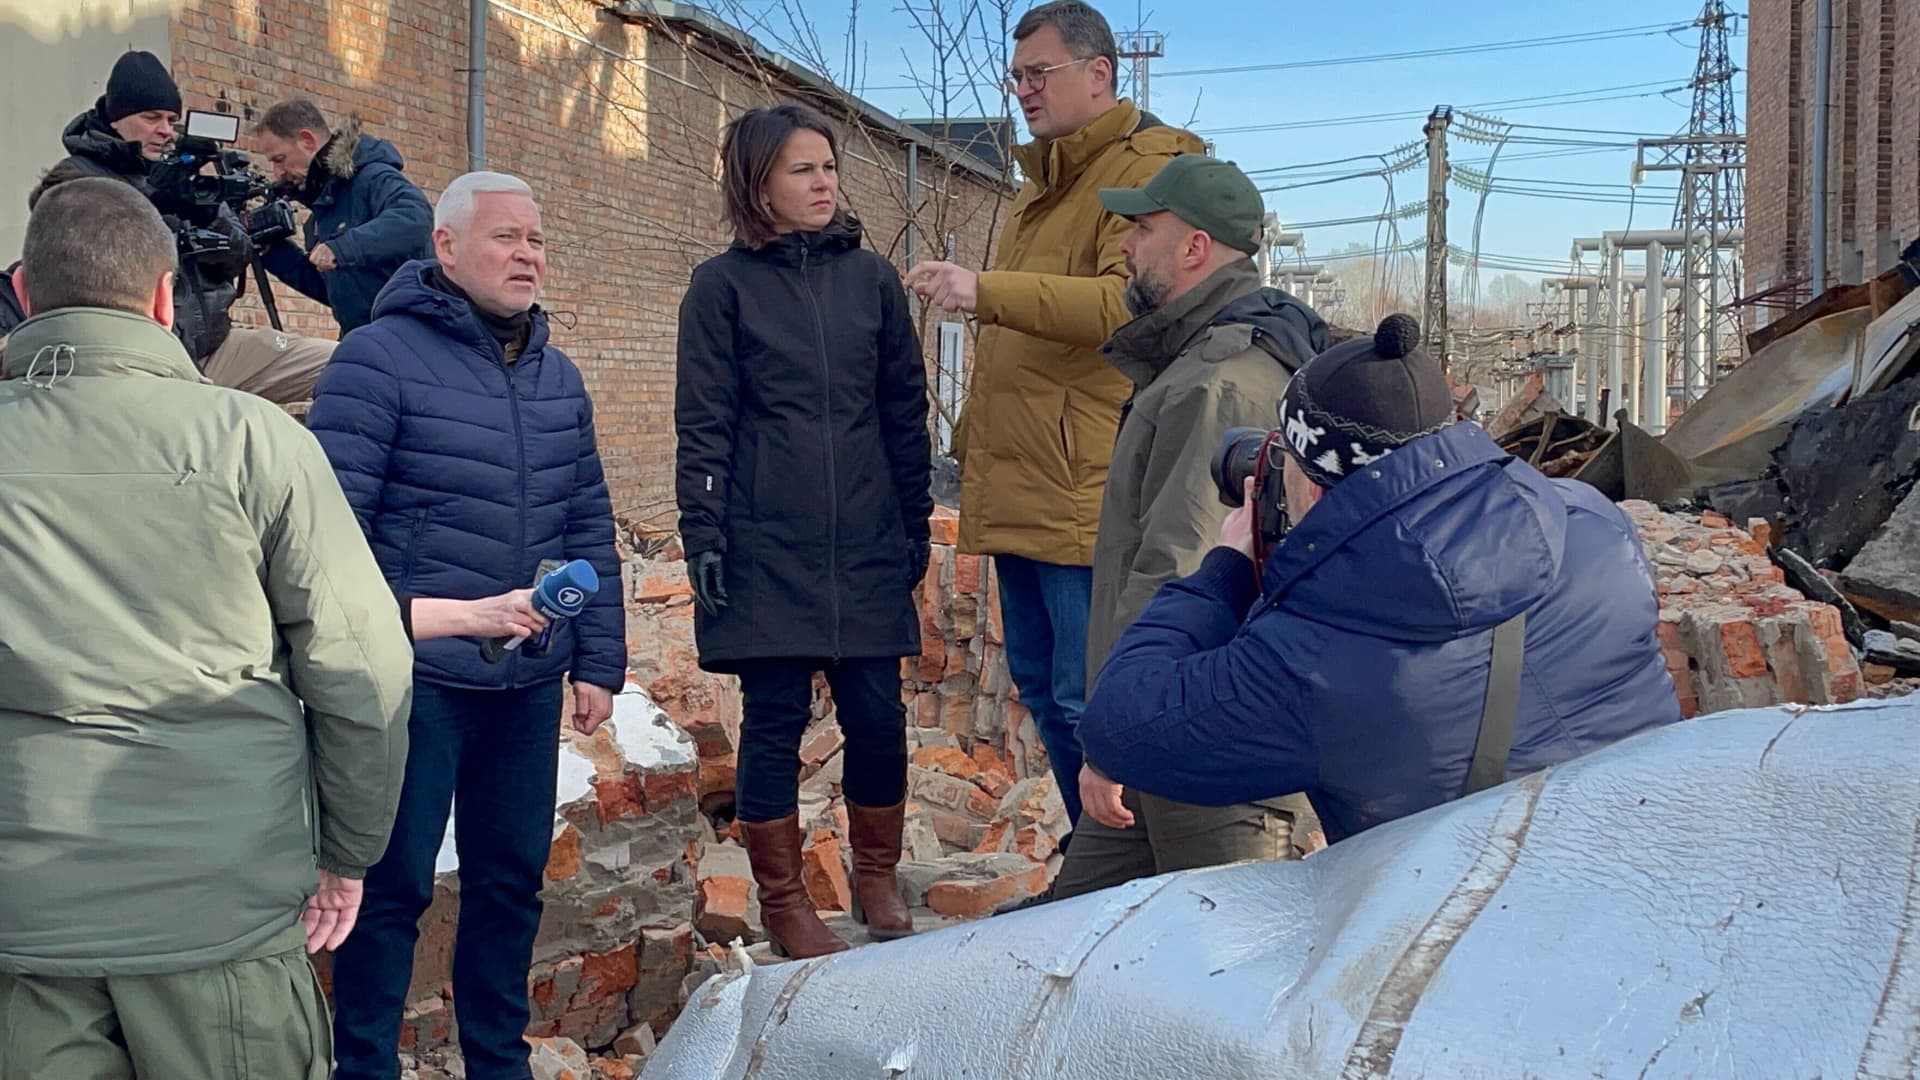 Foreign Minister Annalena Baerbock stands next to Ukrainian Foreign Minister Dmytro Kuleba (3rd from right), Kharkiv Governor Oleh Synehubov (2nd from right) and Kharkiv Mayor Ihor Terekhov (5th from right) in Kharkiv on the site of a substation destroyed by the Russians during her trip to eastern Ukraine.